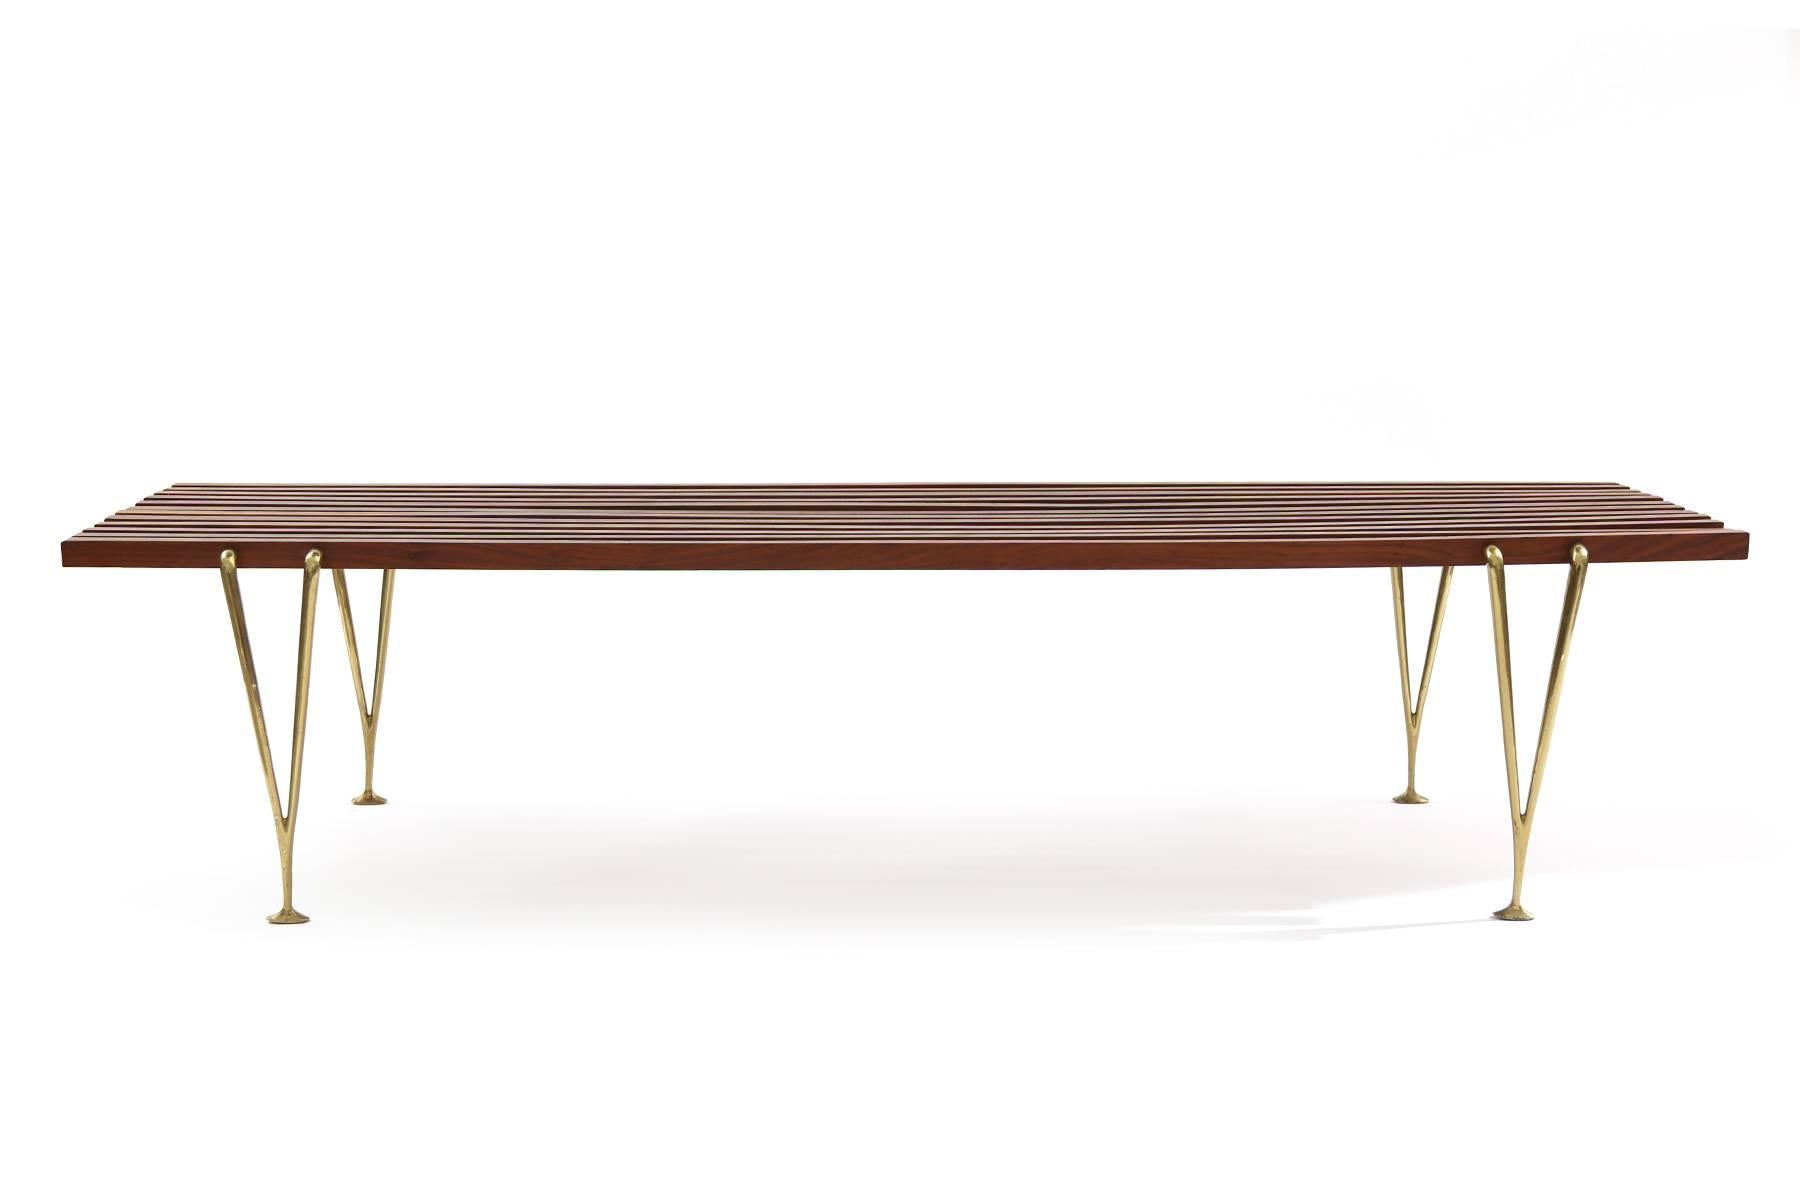 Hugh Acton walnut and brass bench, circa early 1970s. This all original example has solid walnut slats held up by Acton’s iconic sculptural brass legs. Some patina to the brass legs.
    